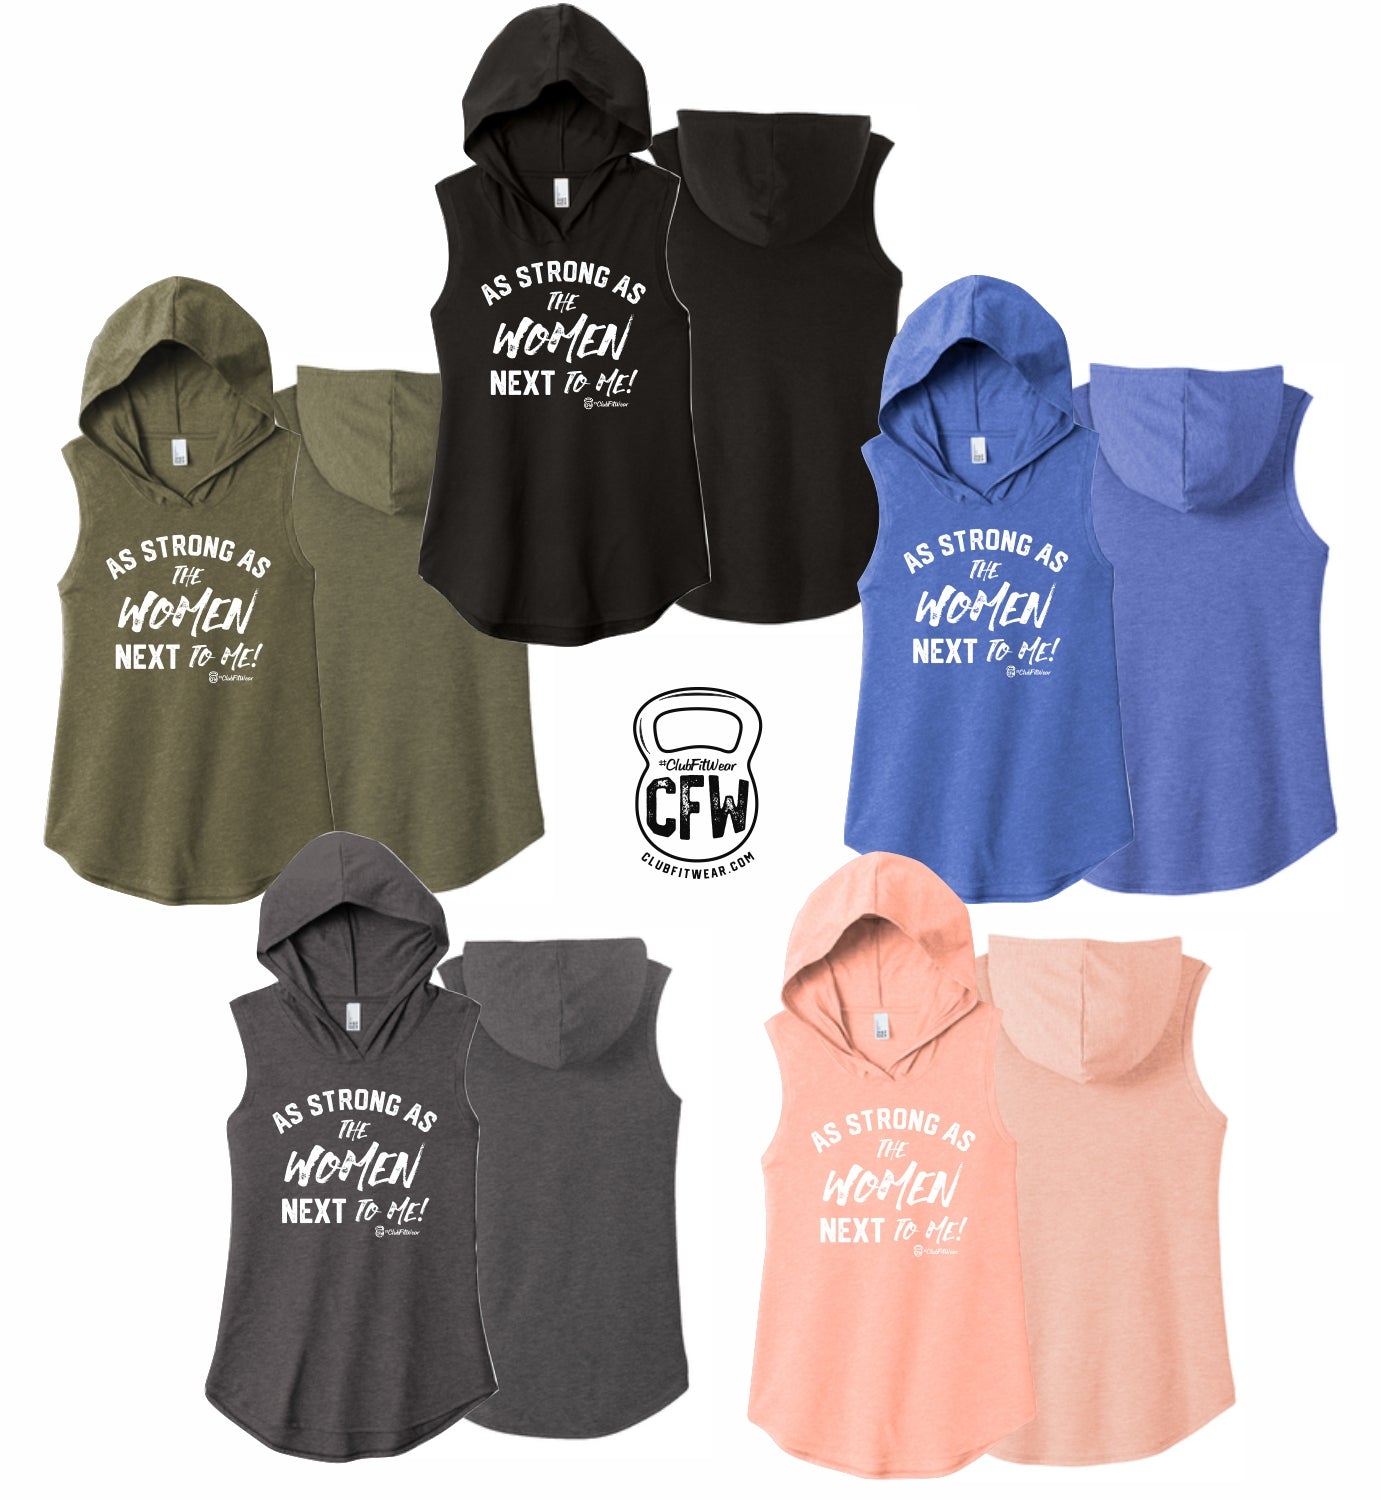 As Strong As the Women Next to Me! - Sleeveless Hoodie